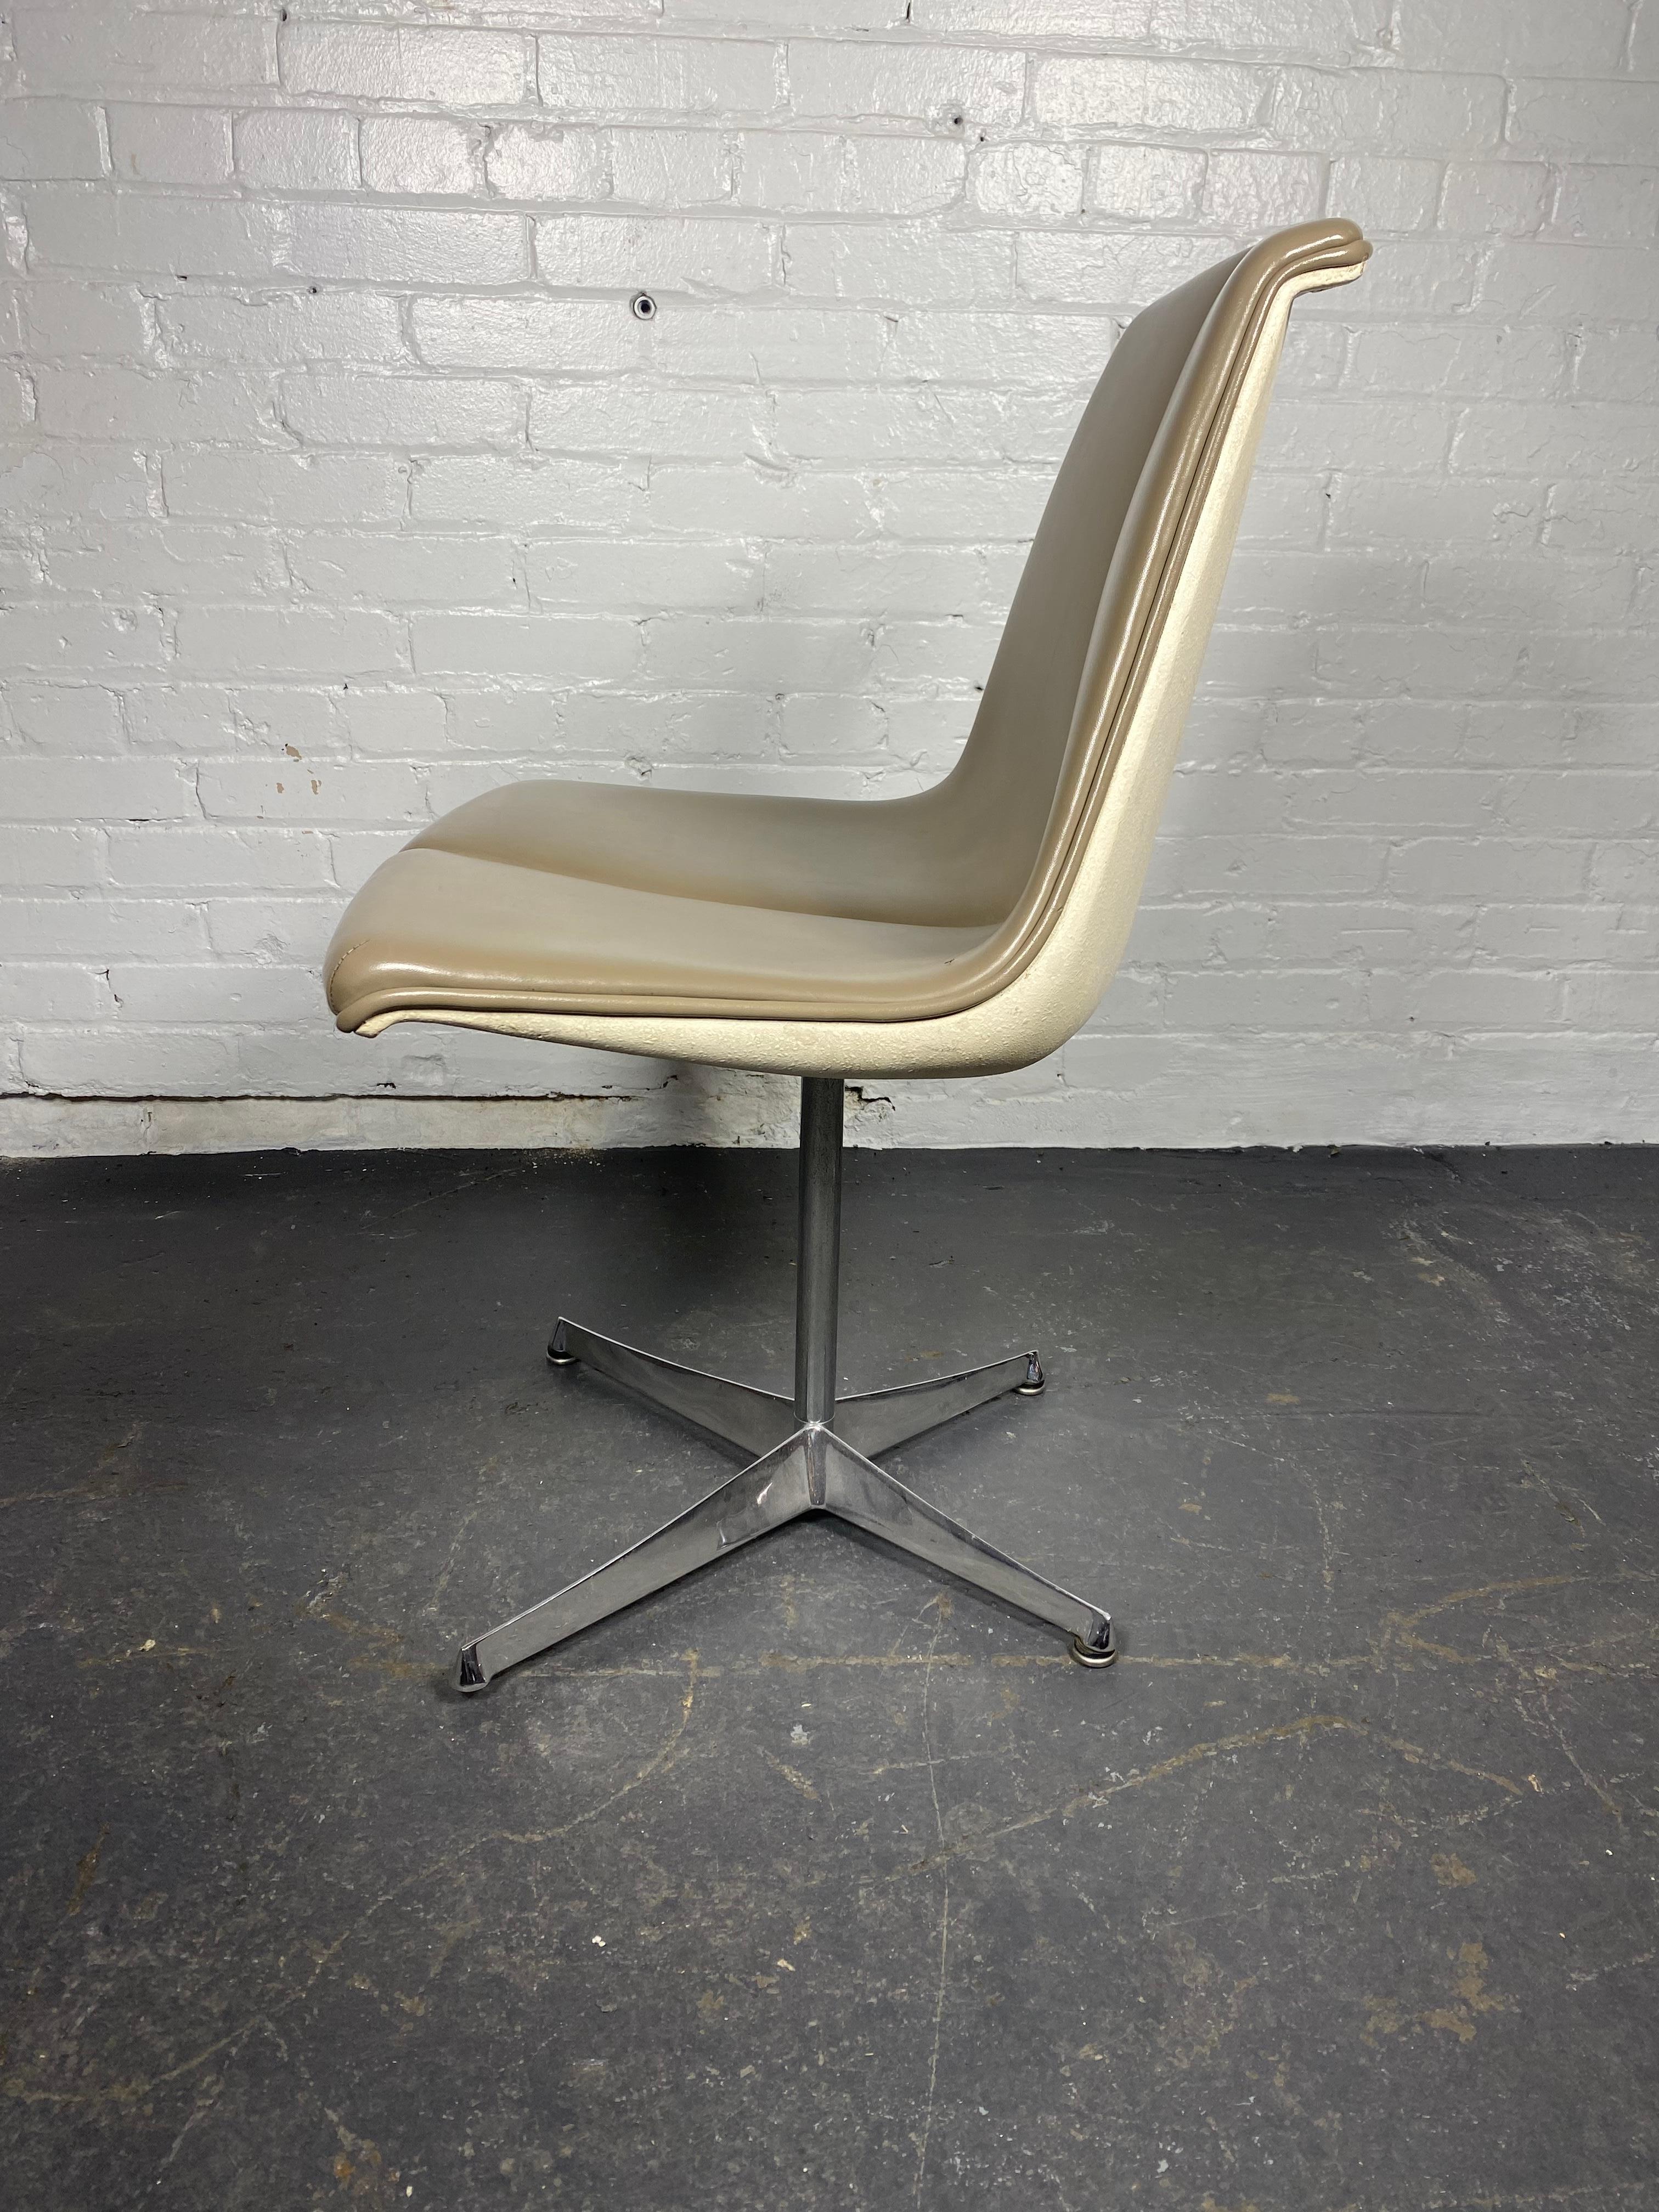 American Early Richard Schultz for Knoll Side Desk Chair..early Knoll label